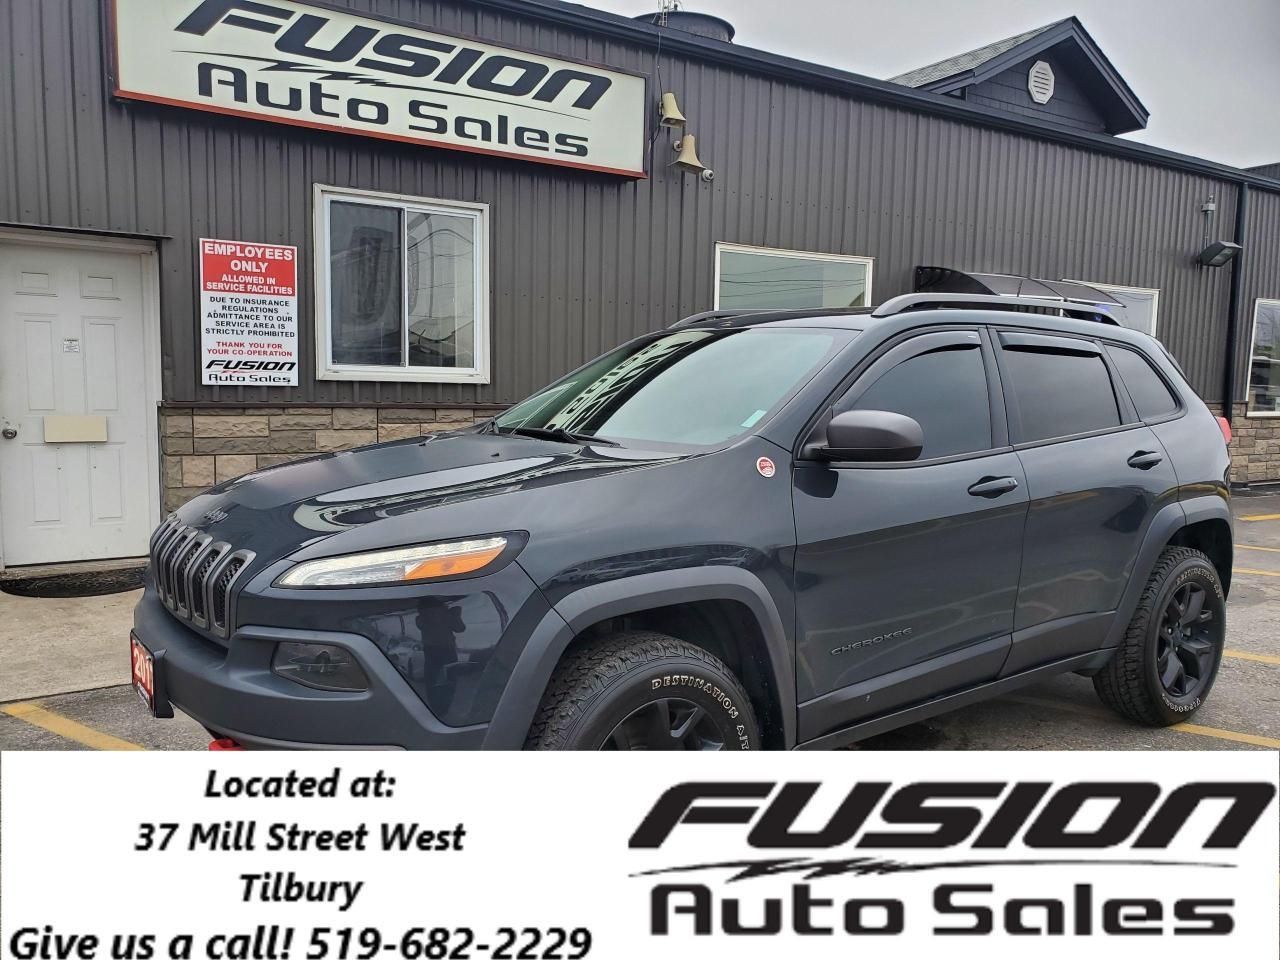 2017 Jeep Cherokee Trailhawk-NO HST TO A MAX OF $2000 LTD TIME ONLY